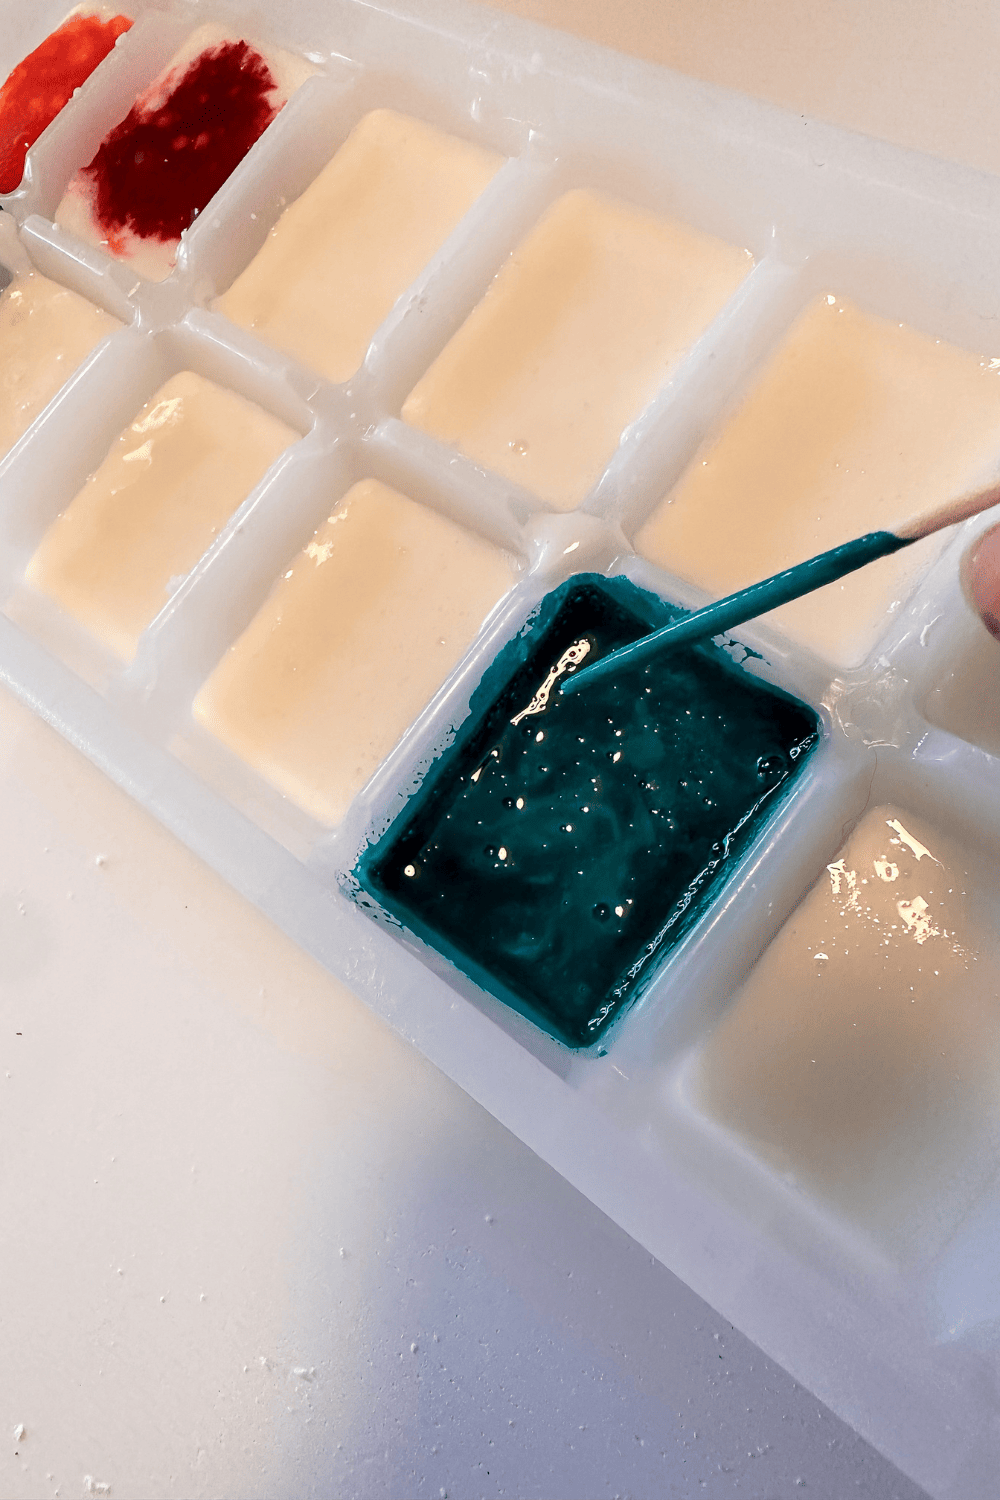 A toothpick covered in homemade watercolor paint being held slightly above a blue homemade watercolor paint in an ice cube tray